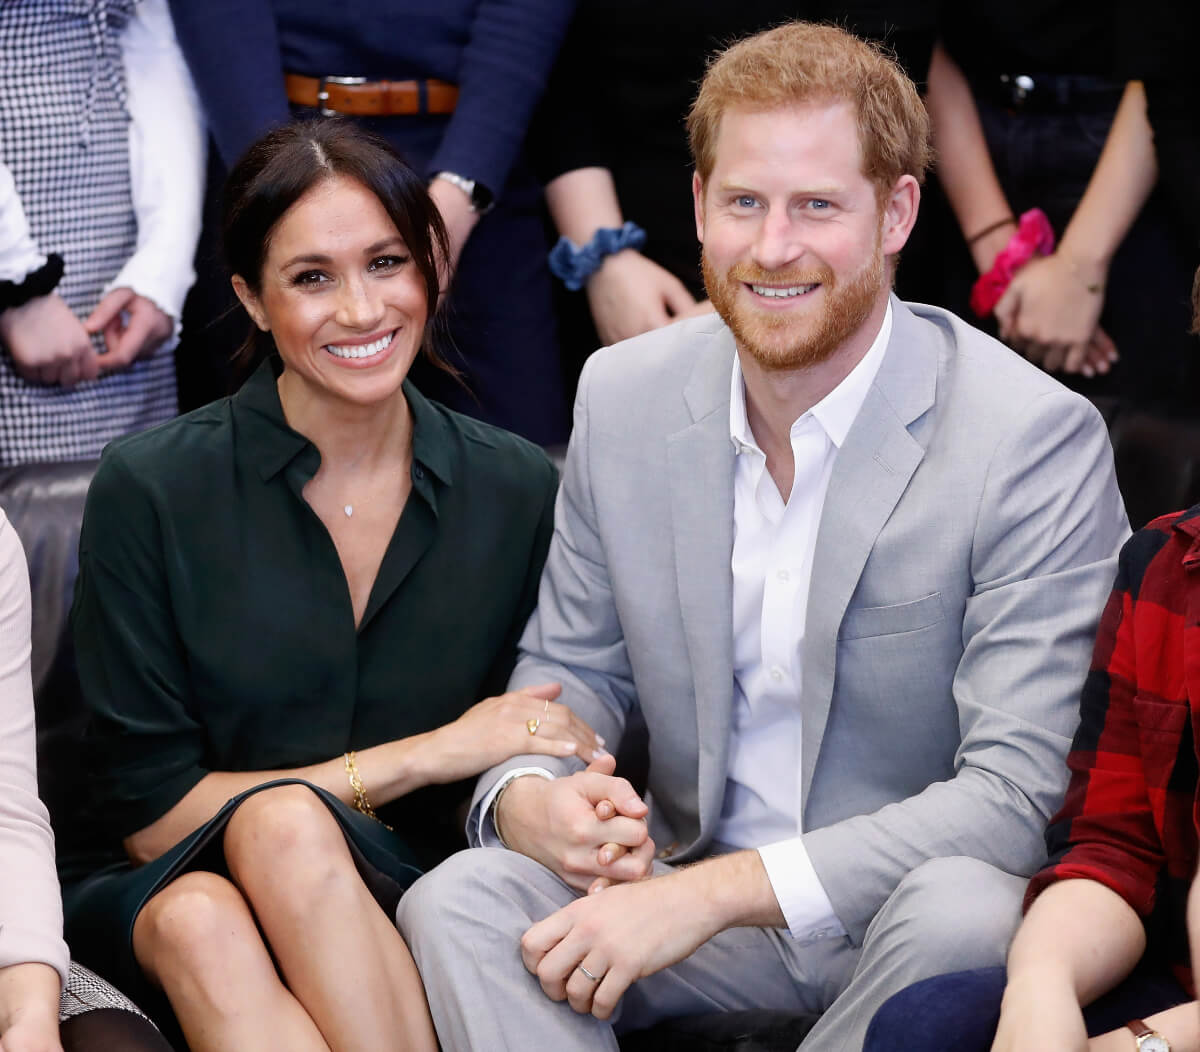 Meghan Markle, Duchess of Sussex and Prince Harry, Duke of Sussex make an official visit to the Joff Youth Centre in Peacehaven, Sussex on October 3, 2018 in Peacehaven, United Kingdom